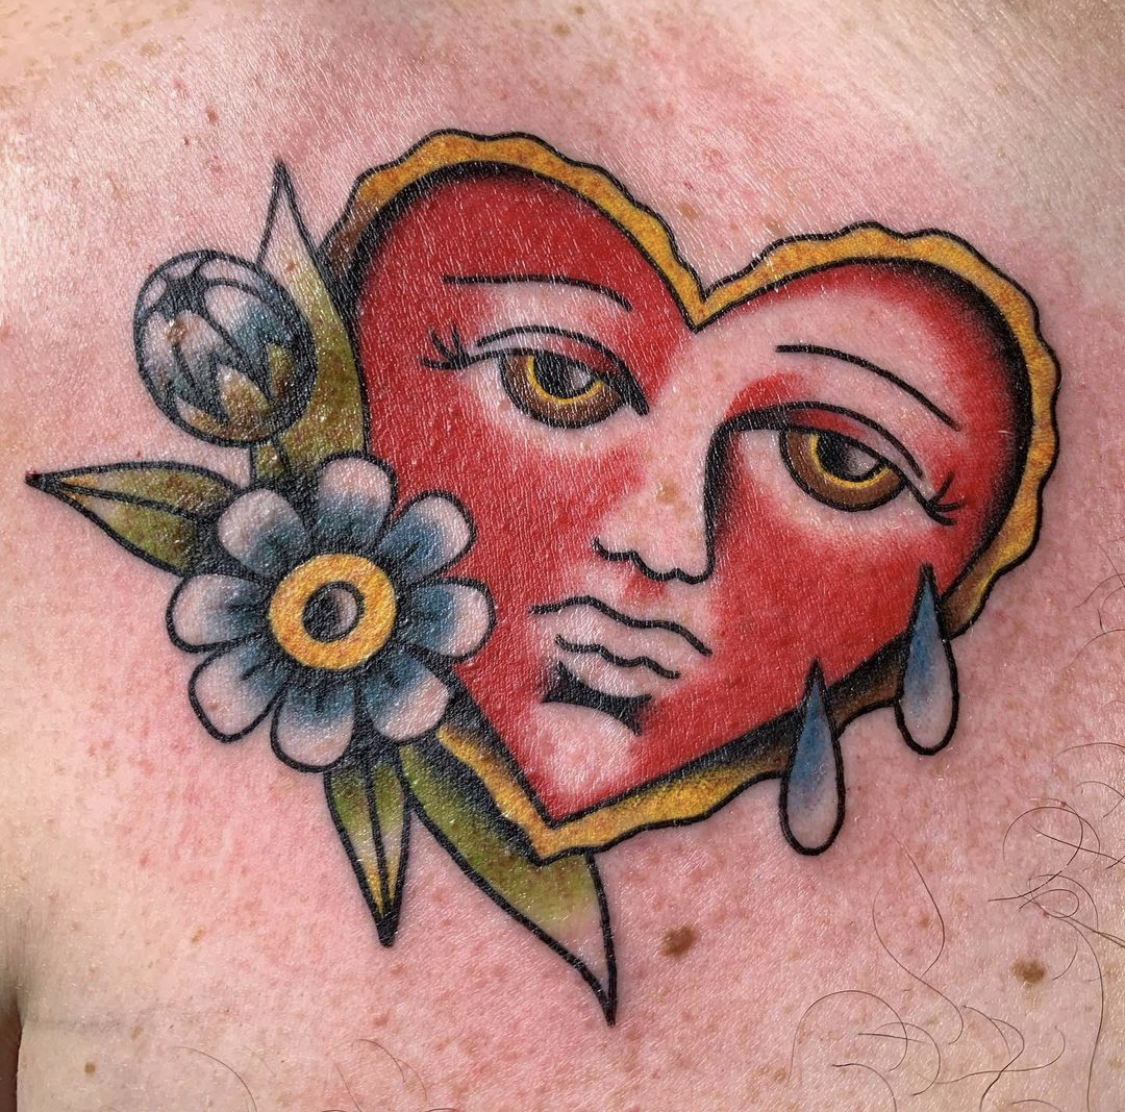 A crying heart with flowers beside it.